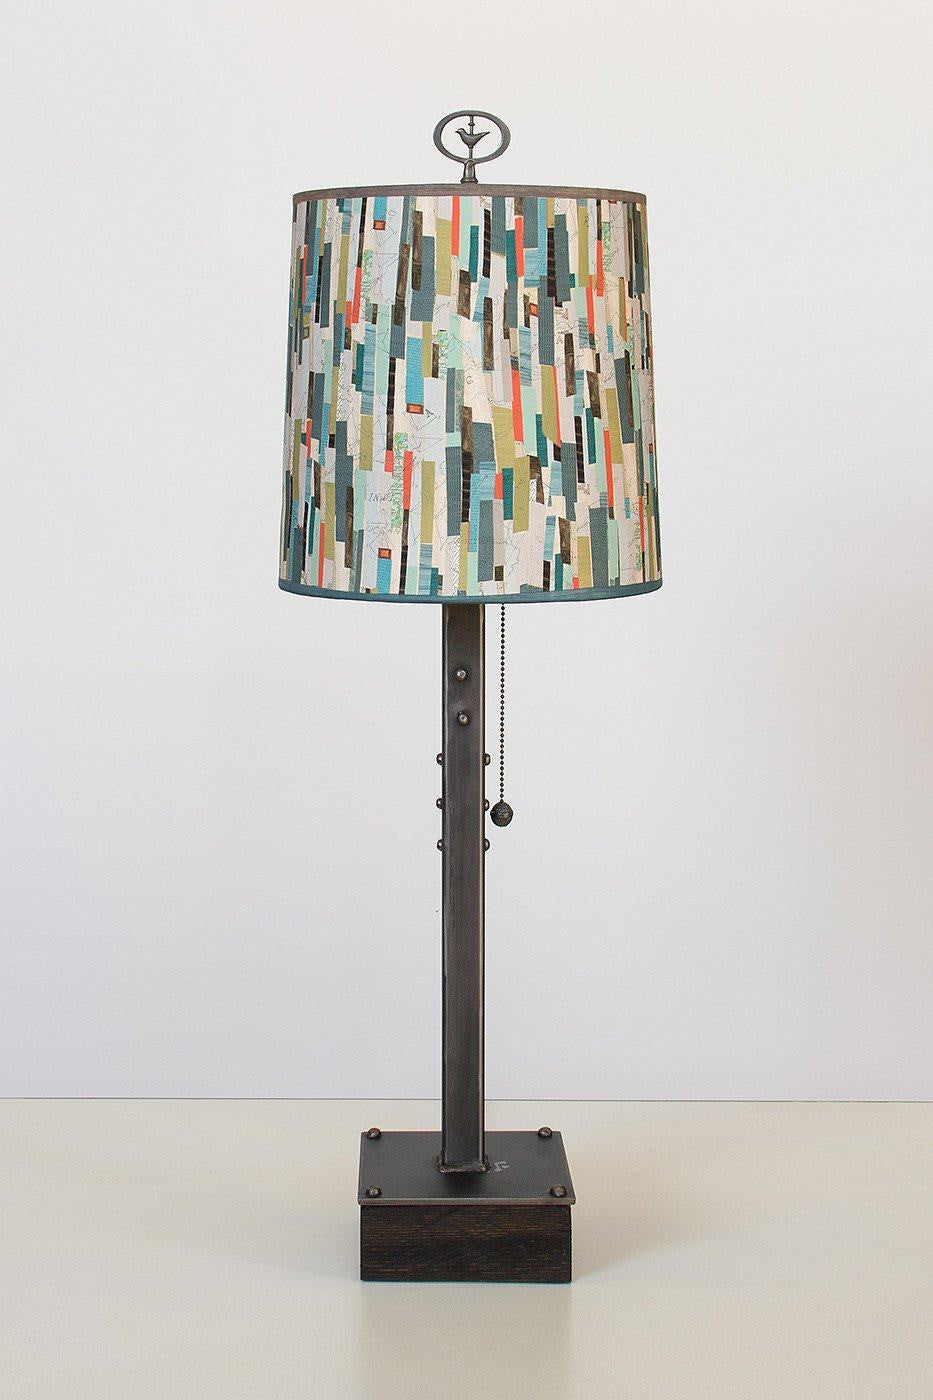 Steel Table Lamp on Wood with Medium Drum Shade in Papers